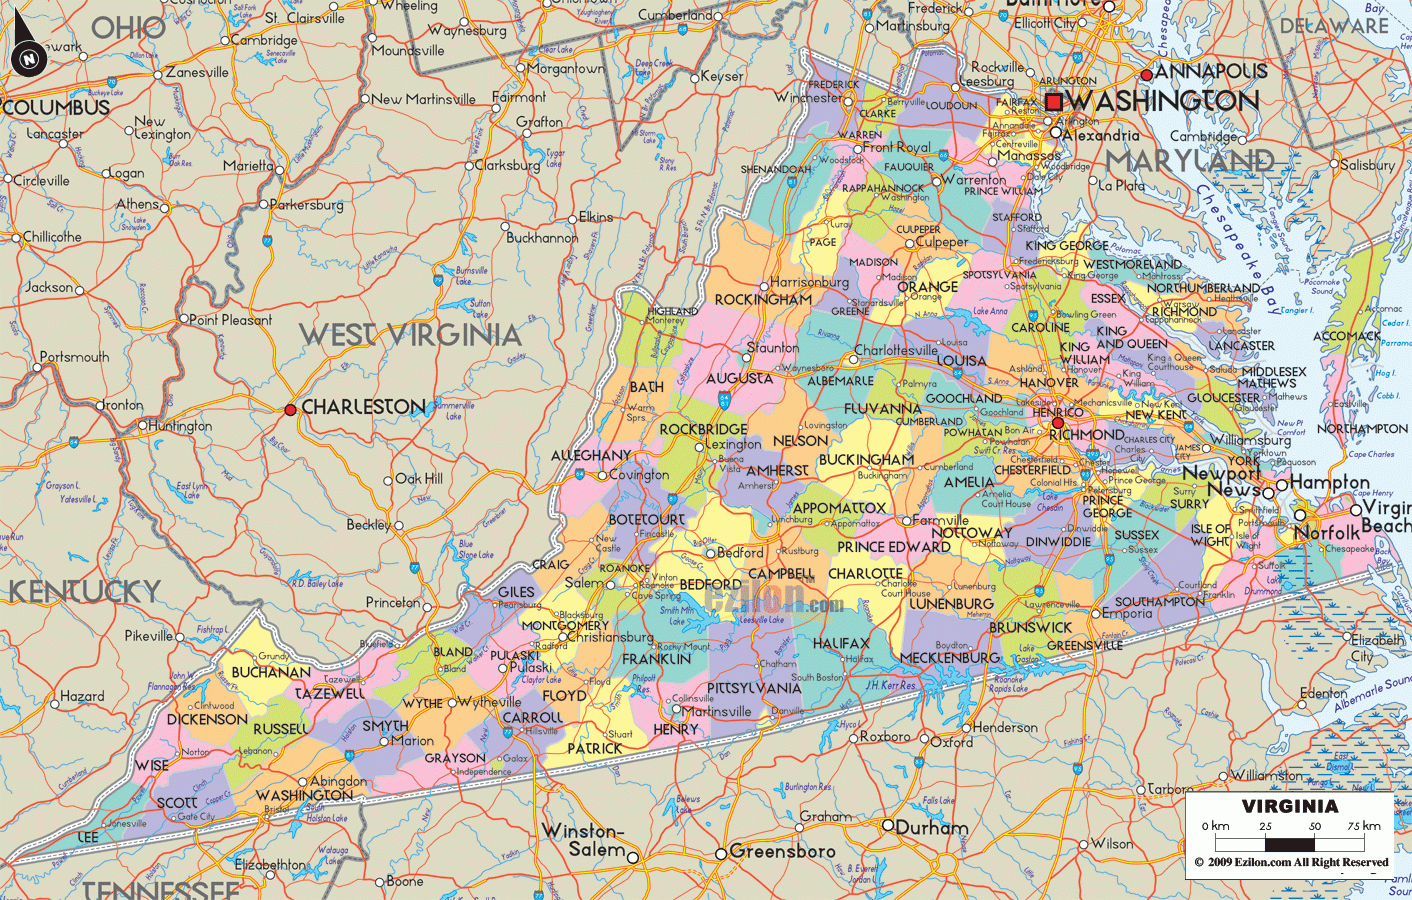 Virginia Counties Map With Roads